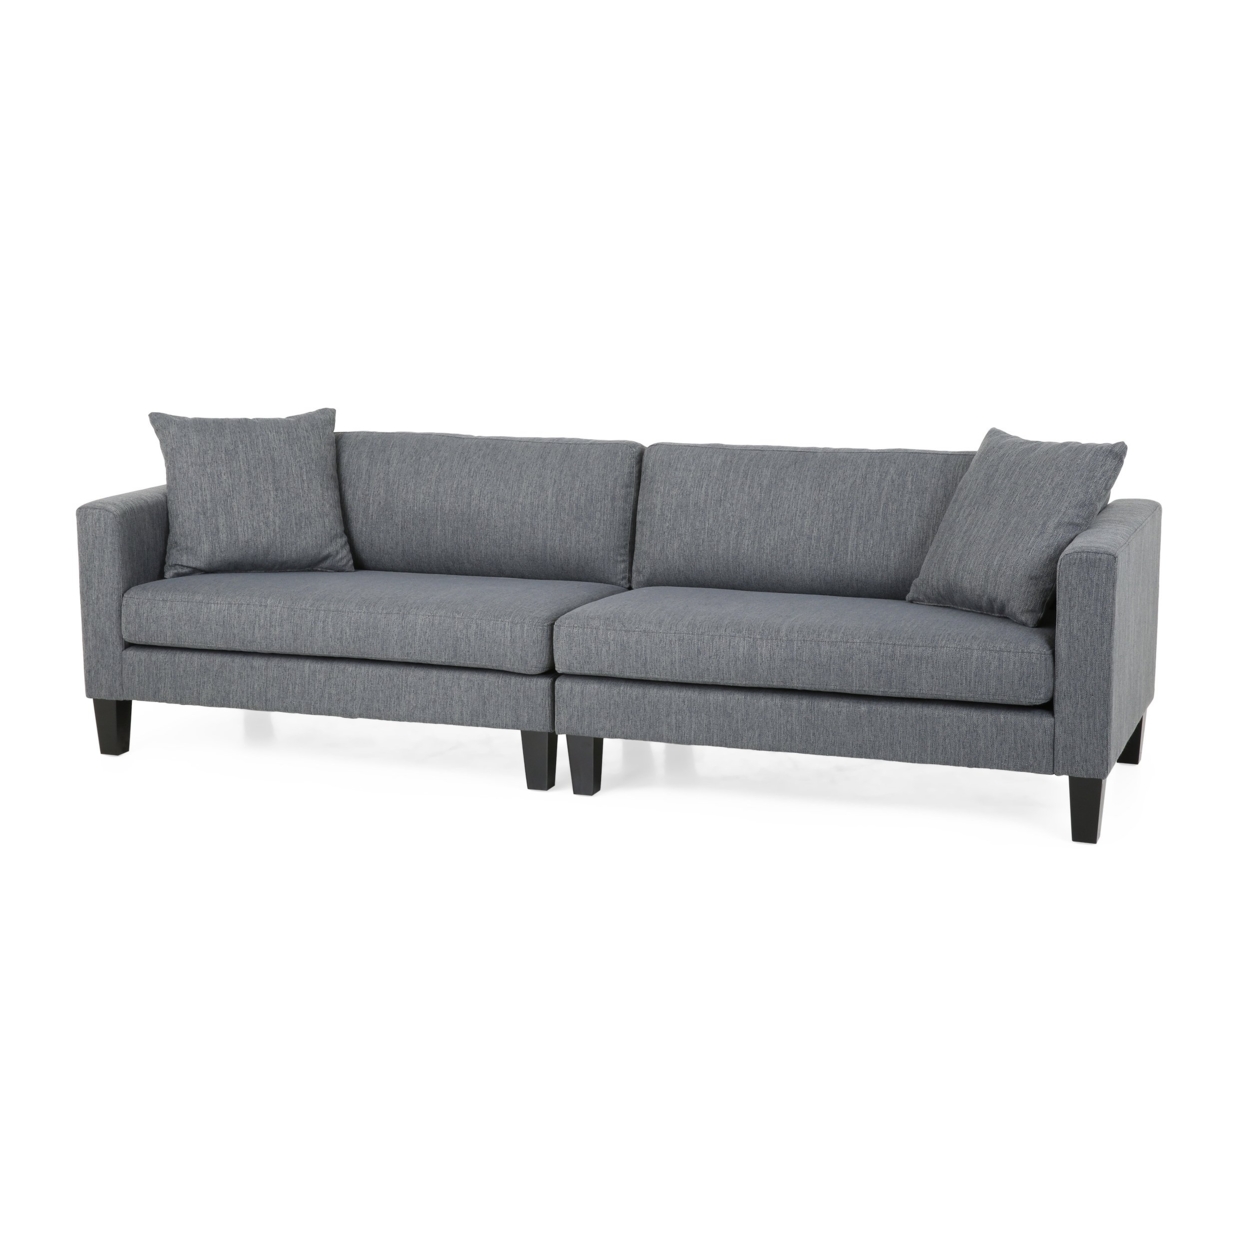 Ilaan Contemporary 4 Seater Fabric Sofa With Accent Pillows - Charcoal/dark Brown